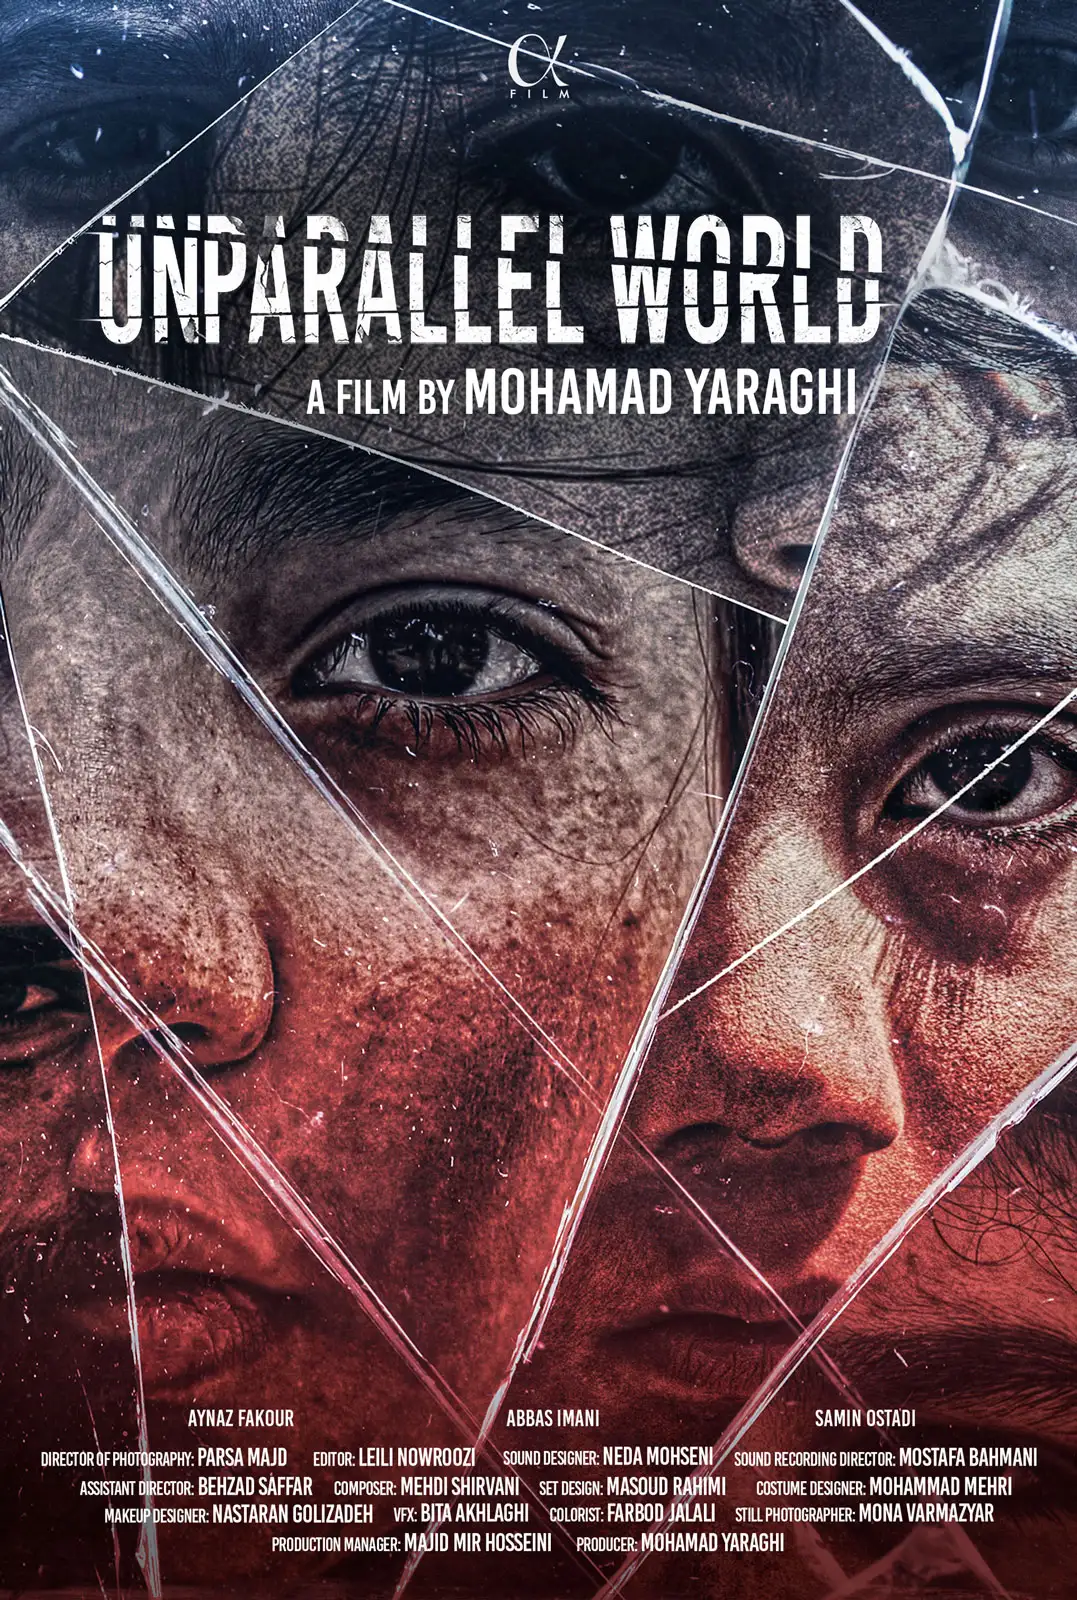 Poster of the short film "Unparallel World"